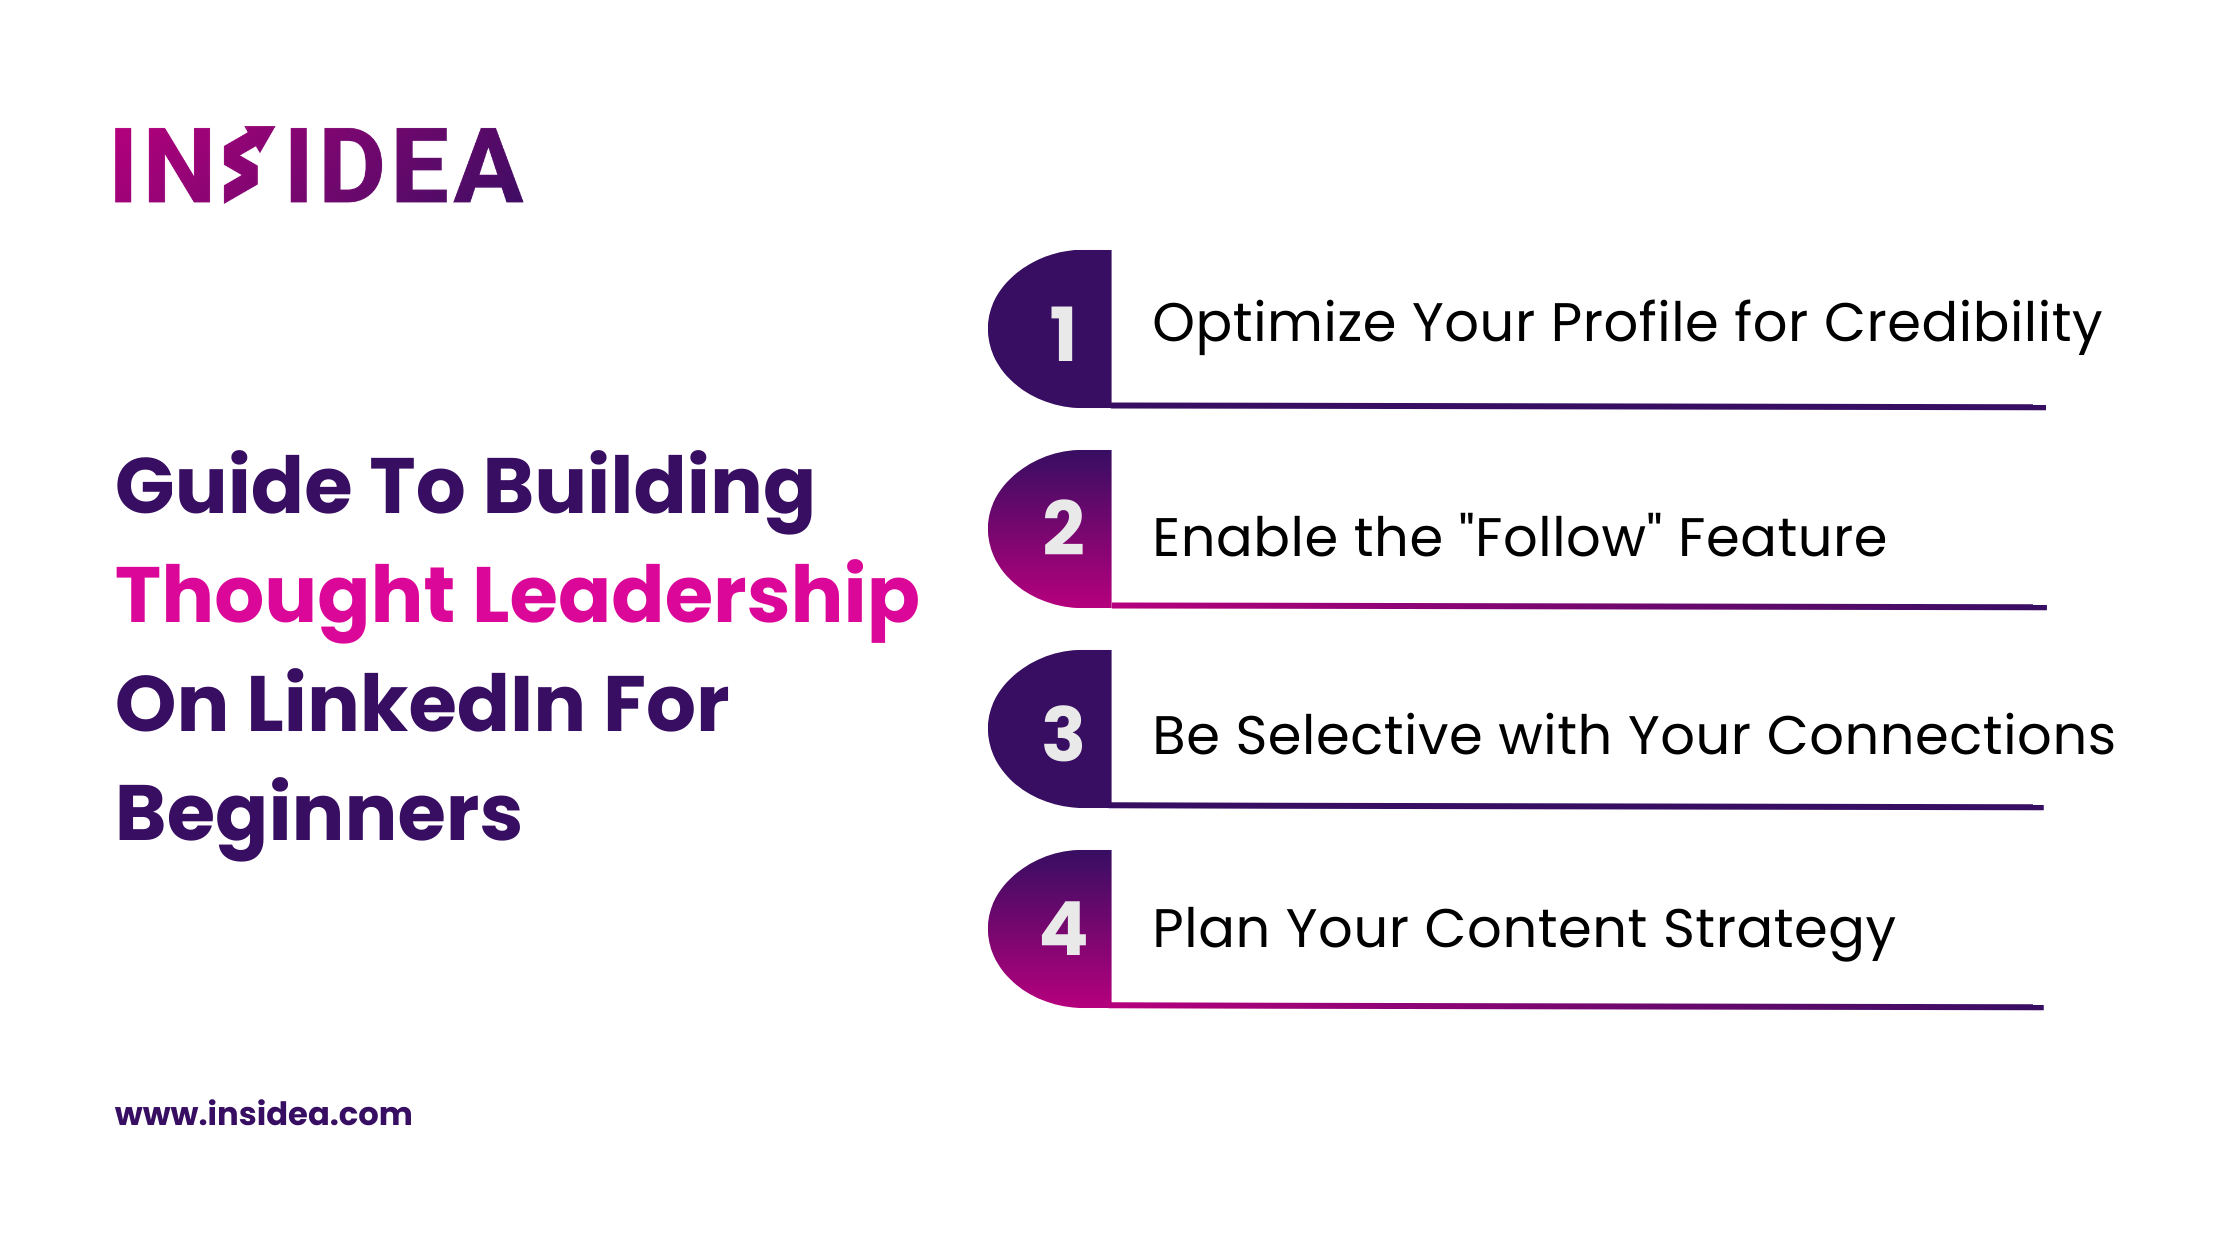 Guide To Building Thought Leadership On LinkedIn For Beginners